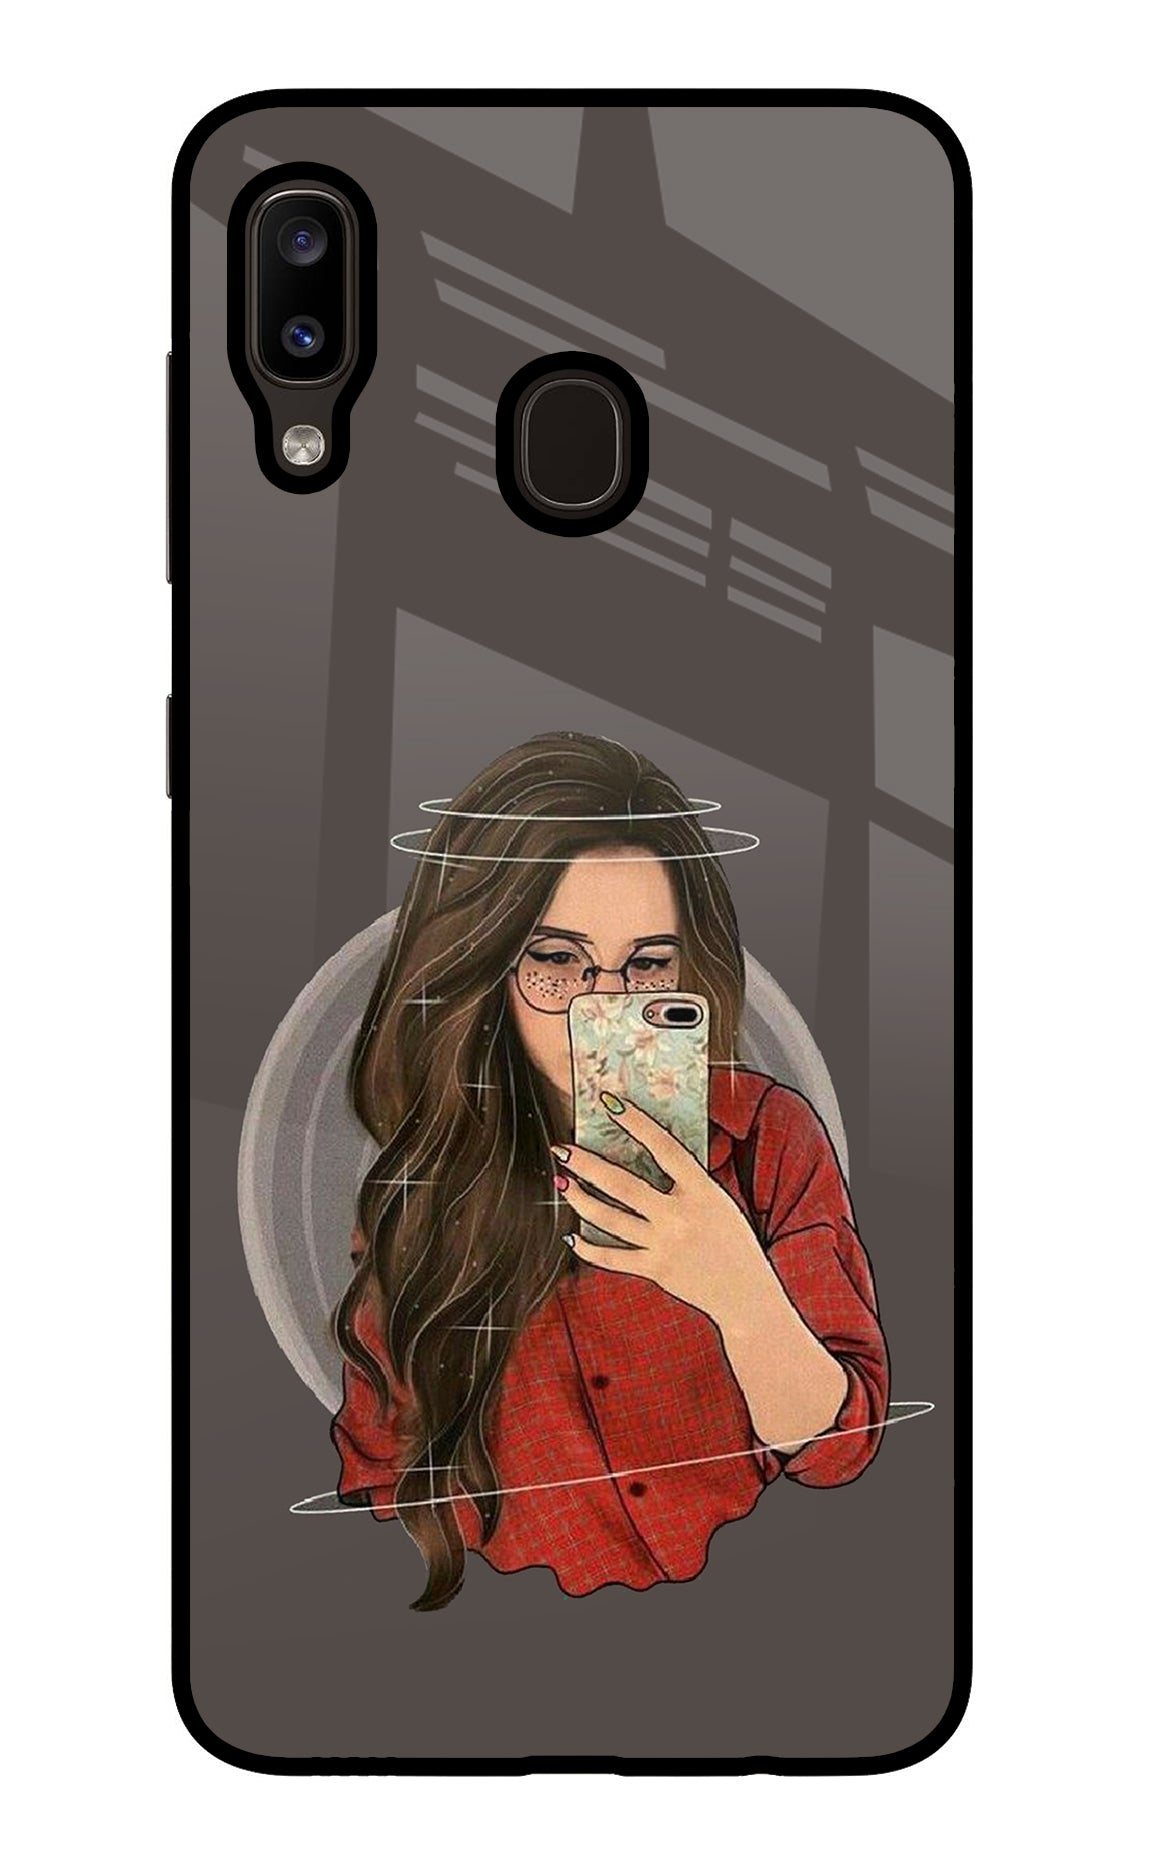 Selfie Queen Samsung A20/M10s Back Cover